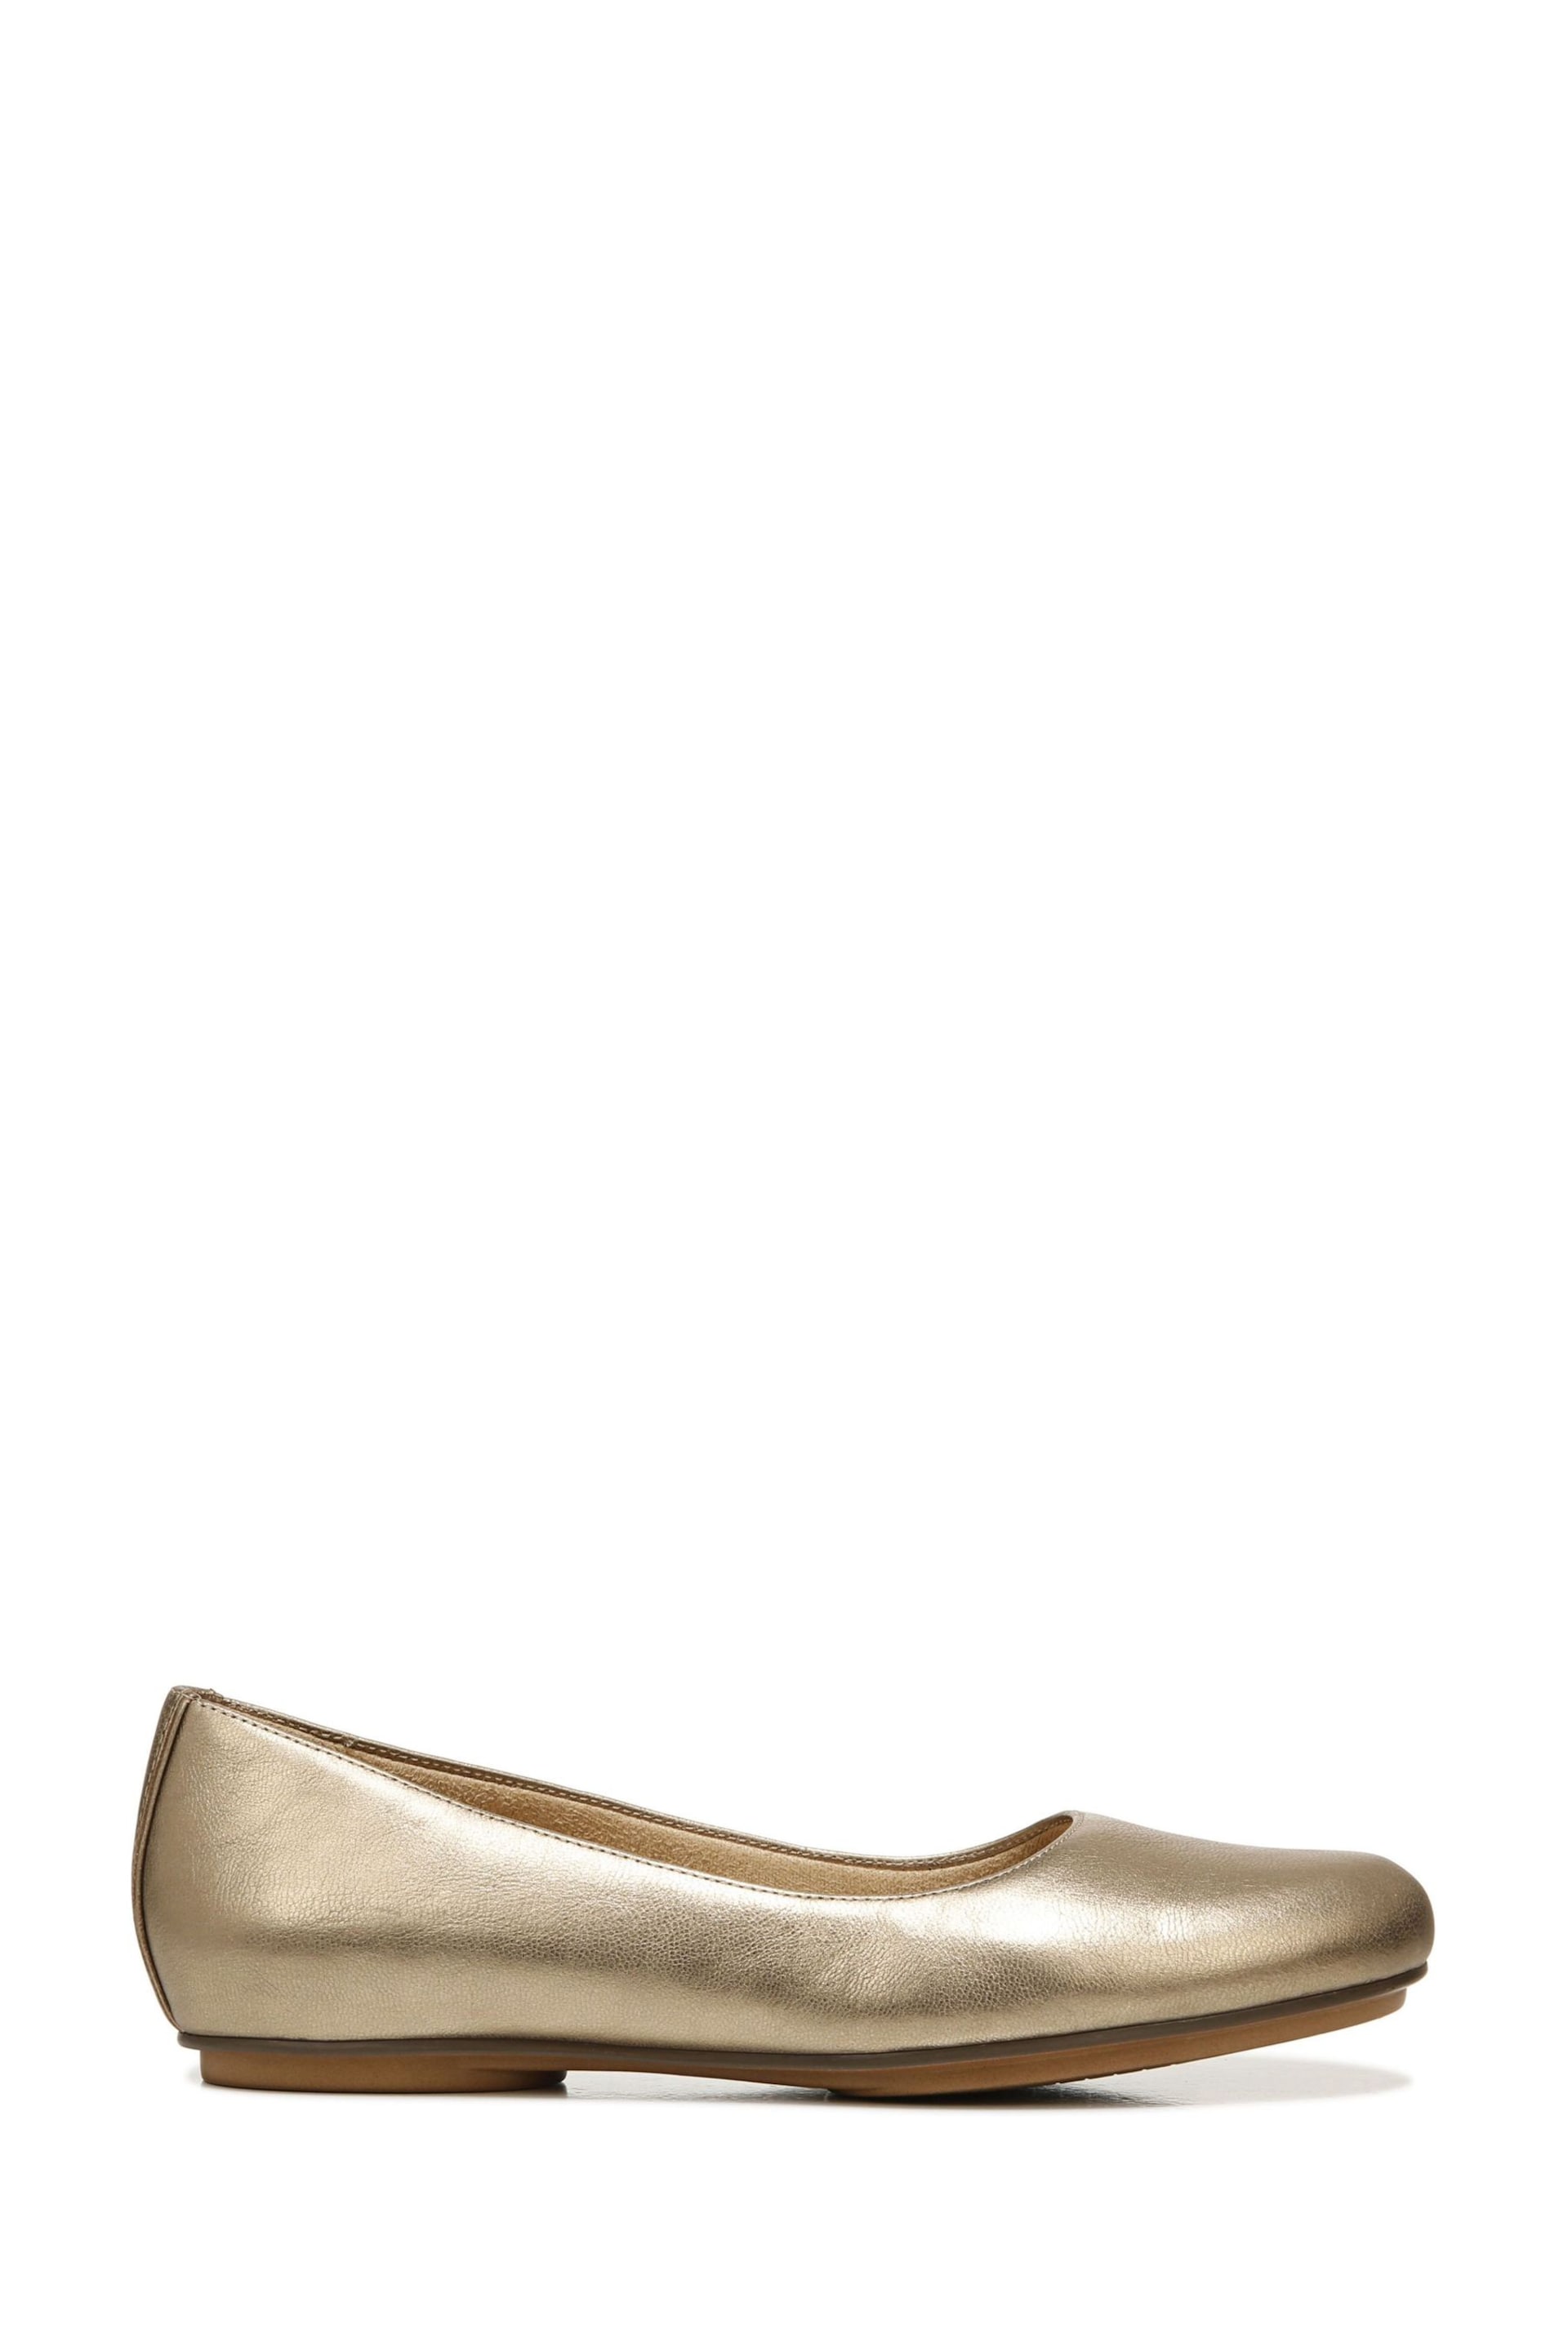 Naturalizer Maxwell Leather Ballerina Shoes - Image 1 of 7